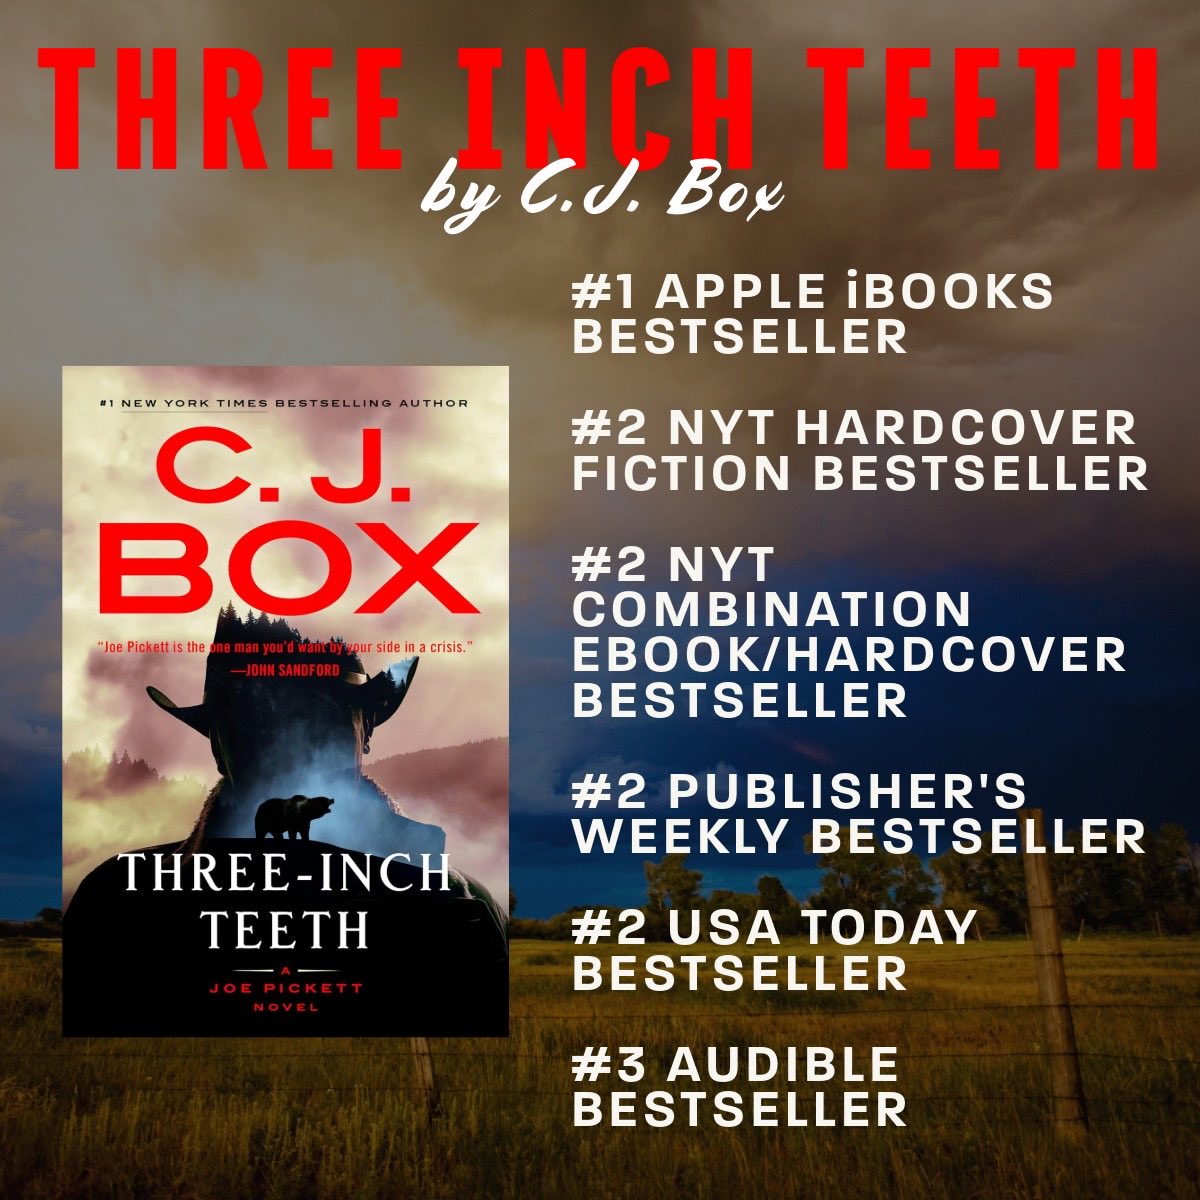 Thank you to my readers for a really good run! #ThreeInchTeeth